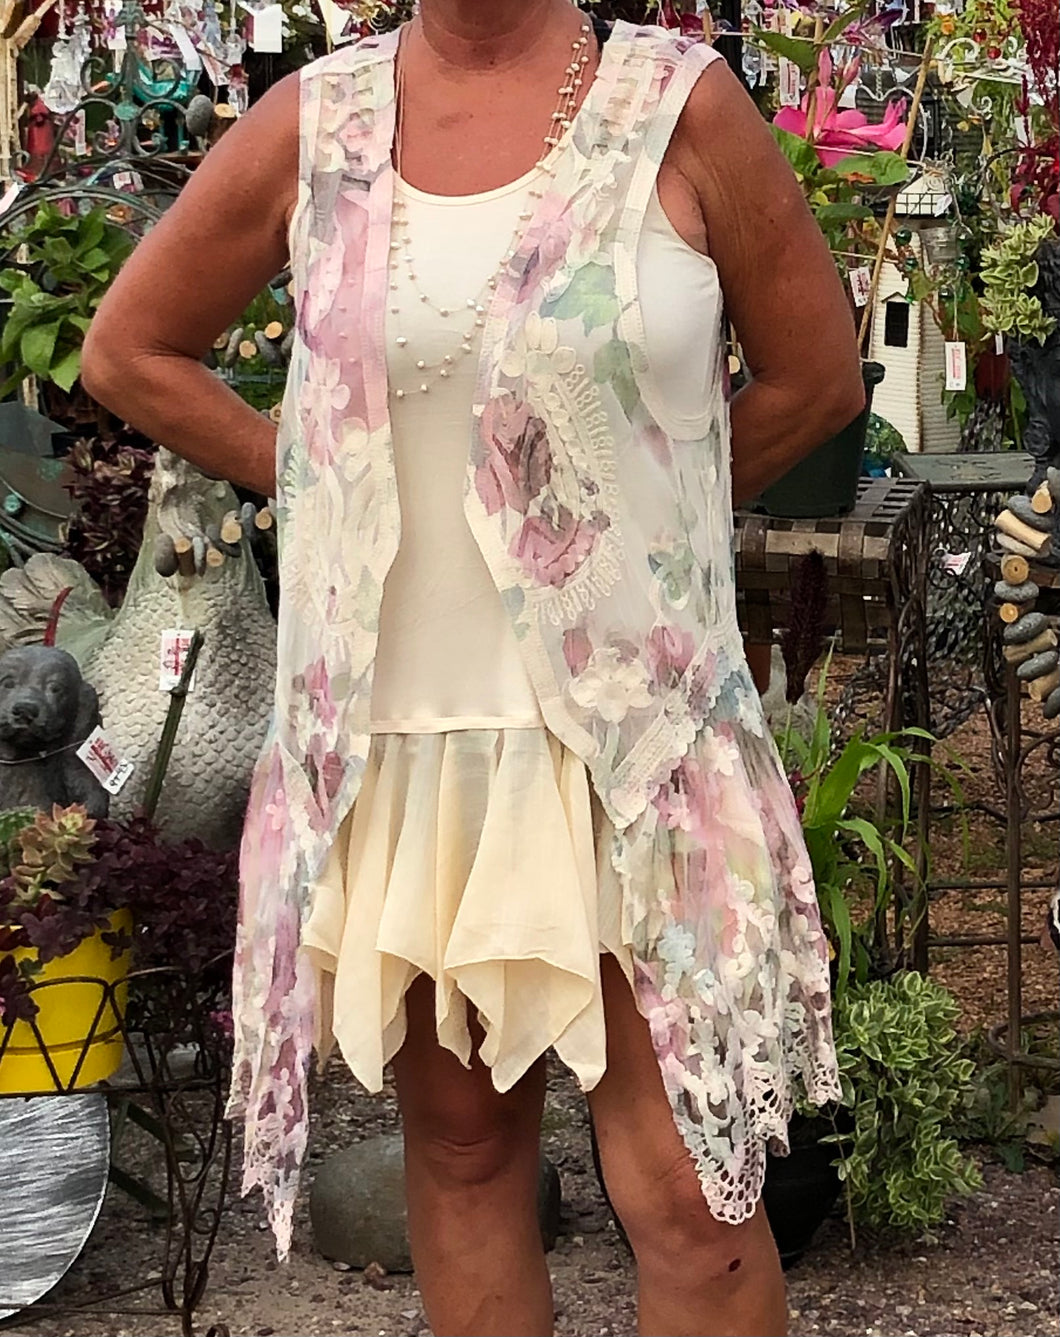 Big Rose Floral Vest | Sleeveless Jacket by Origami | Plus Size 3X